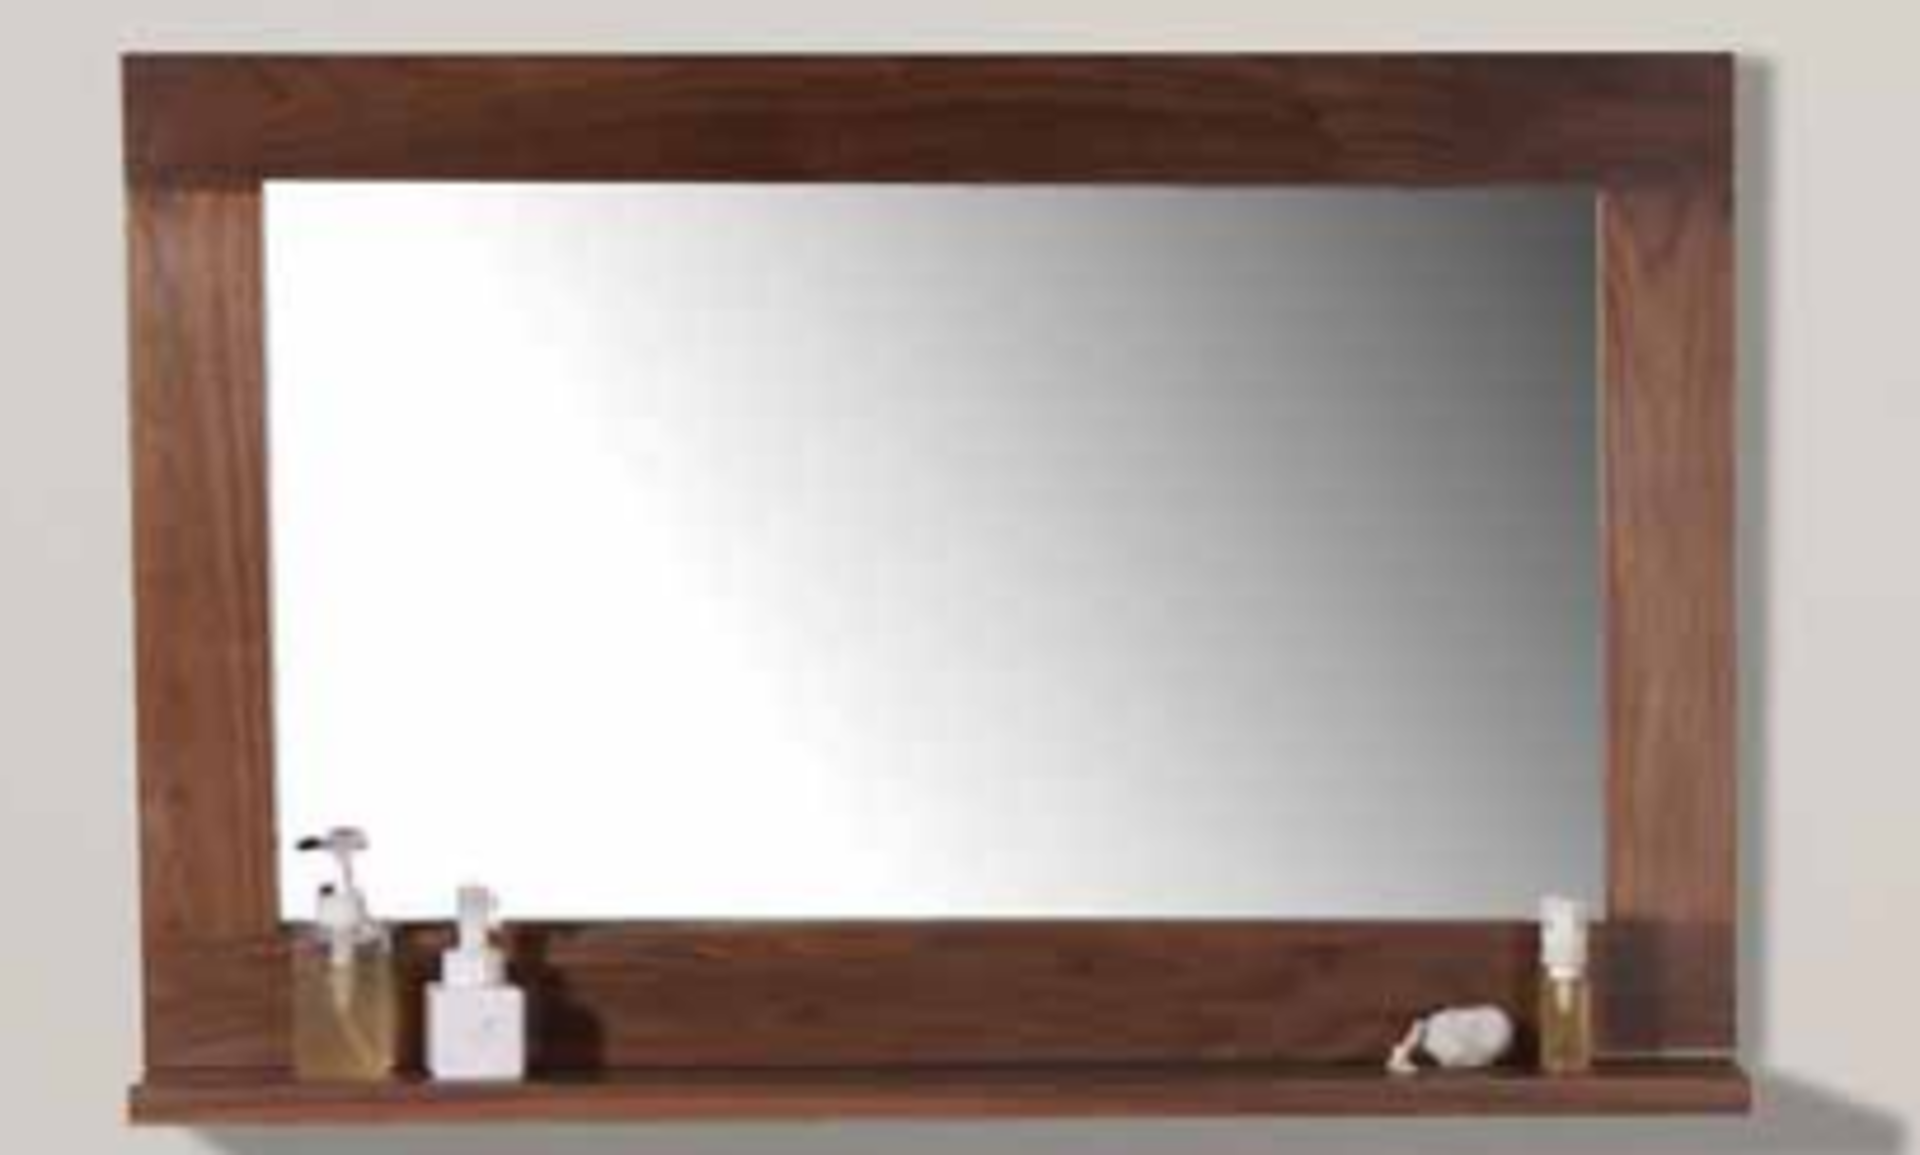 1 x Stonearth Bathroom Wall Mirror With Solid Walnut Frame and Bevelled Glass Mirror - Size: Large - Image 2 of 10